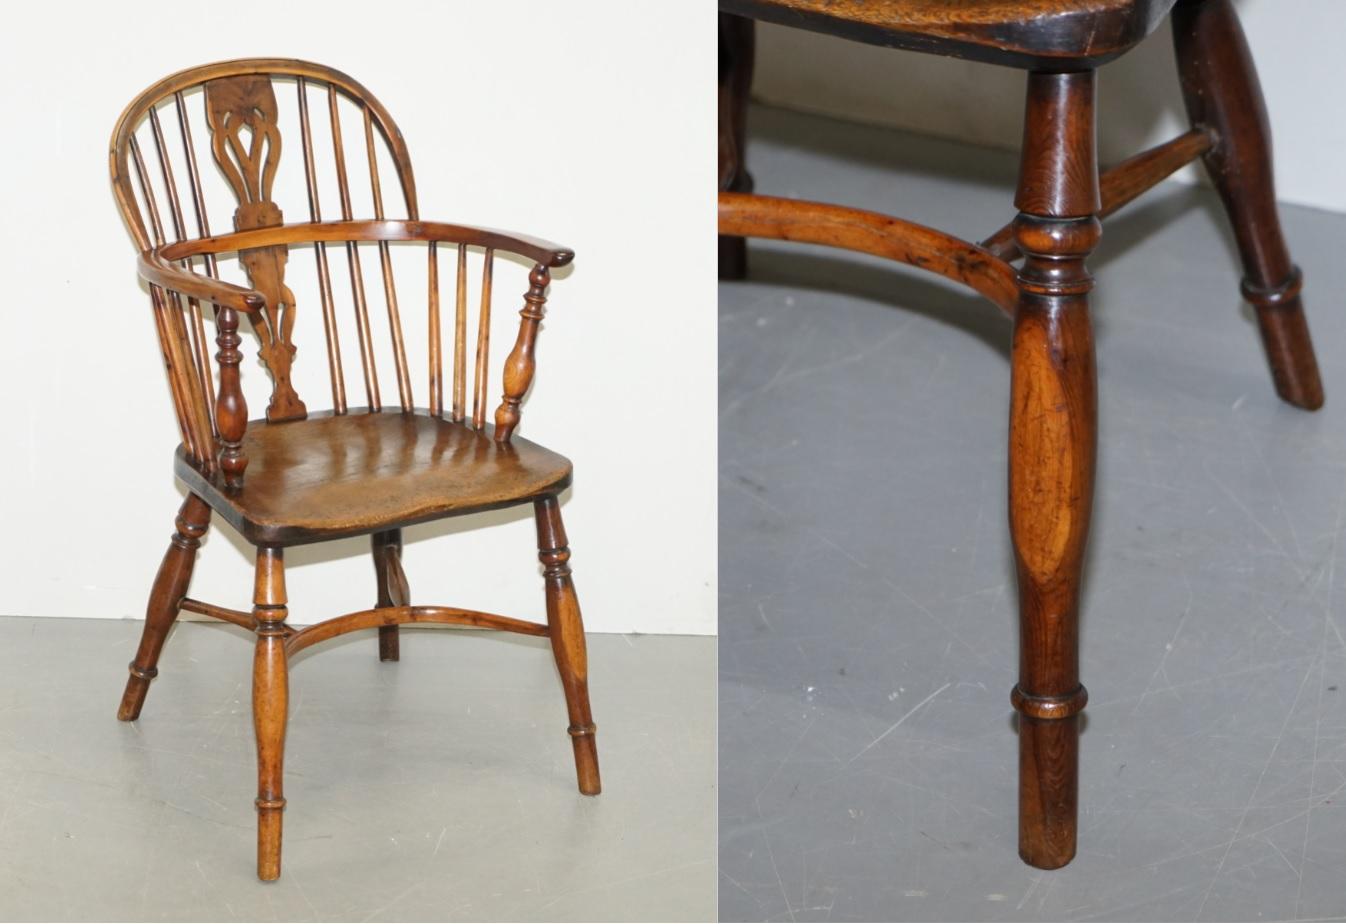 We are delighted to 1 of 6 lovely solid Yew hand sawn circa 1860 Windsor stick back armchair

I have six of these in stock, one exact pair and then four others which all have slight subtle variations, as such I am listing them separately 

The